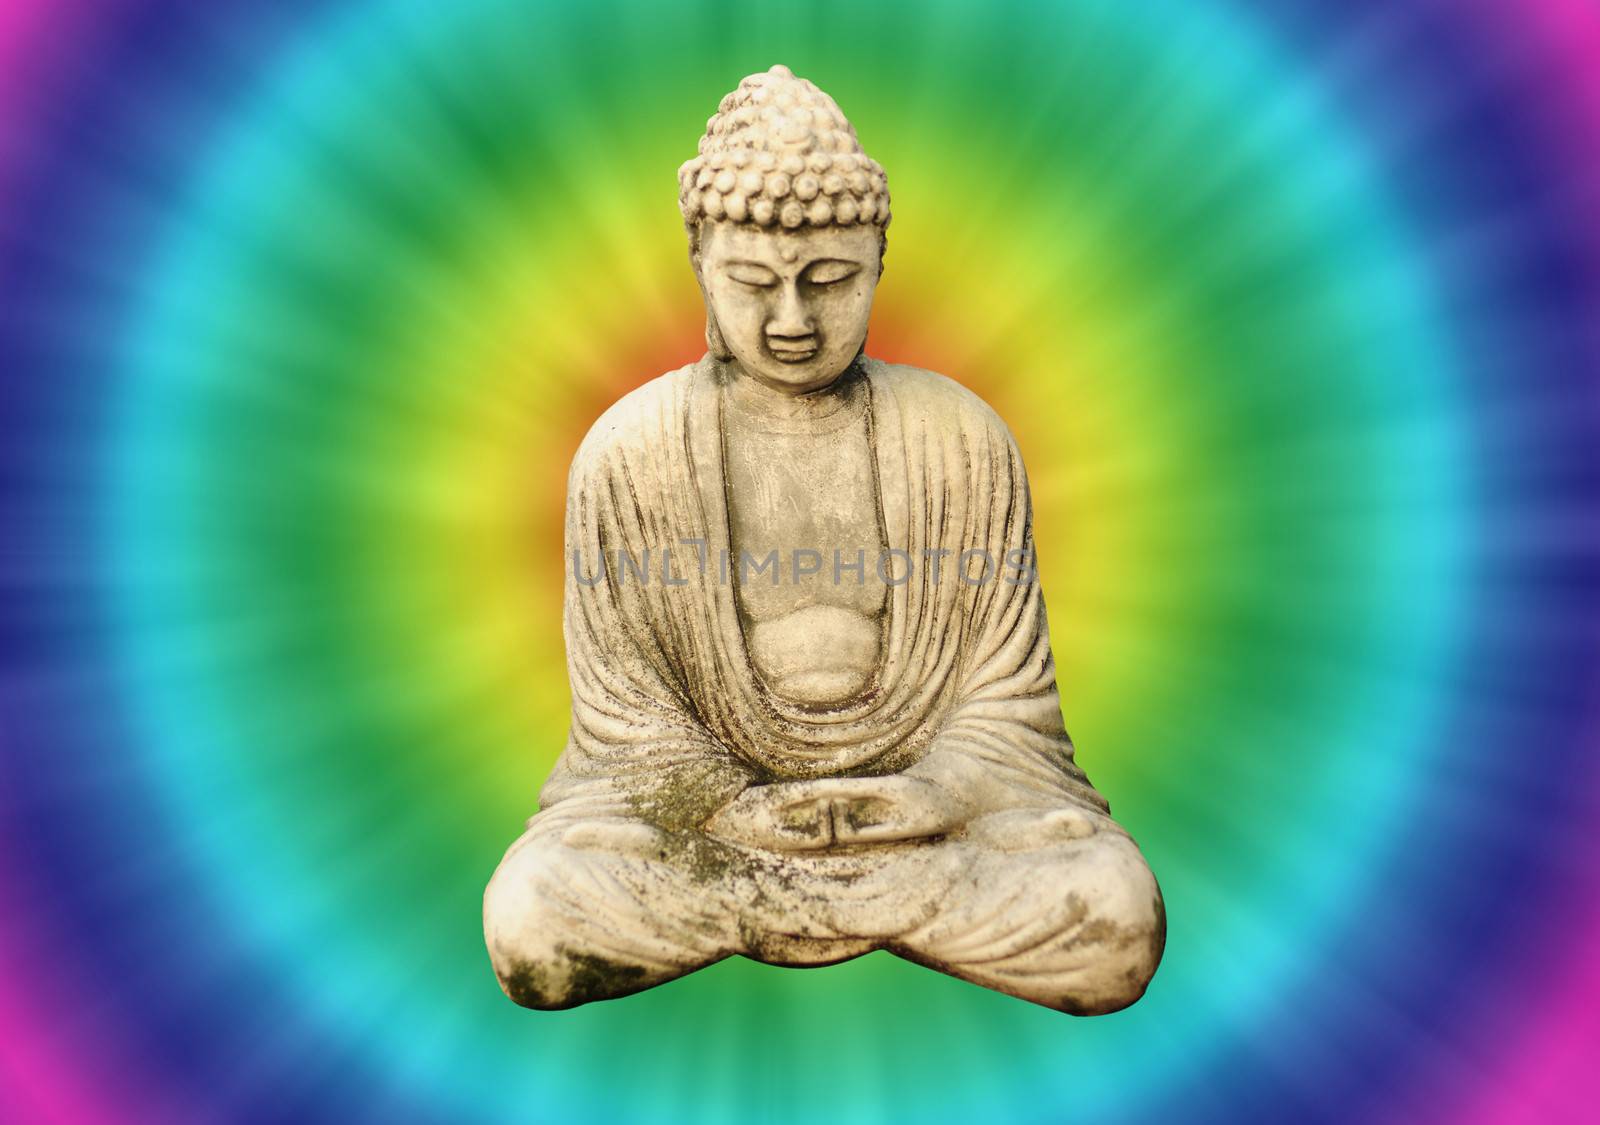 Buddha with retro or psychedelic background for enlightenment concept